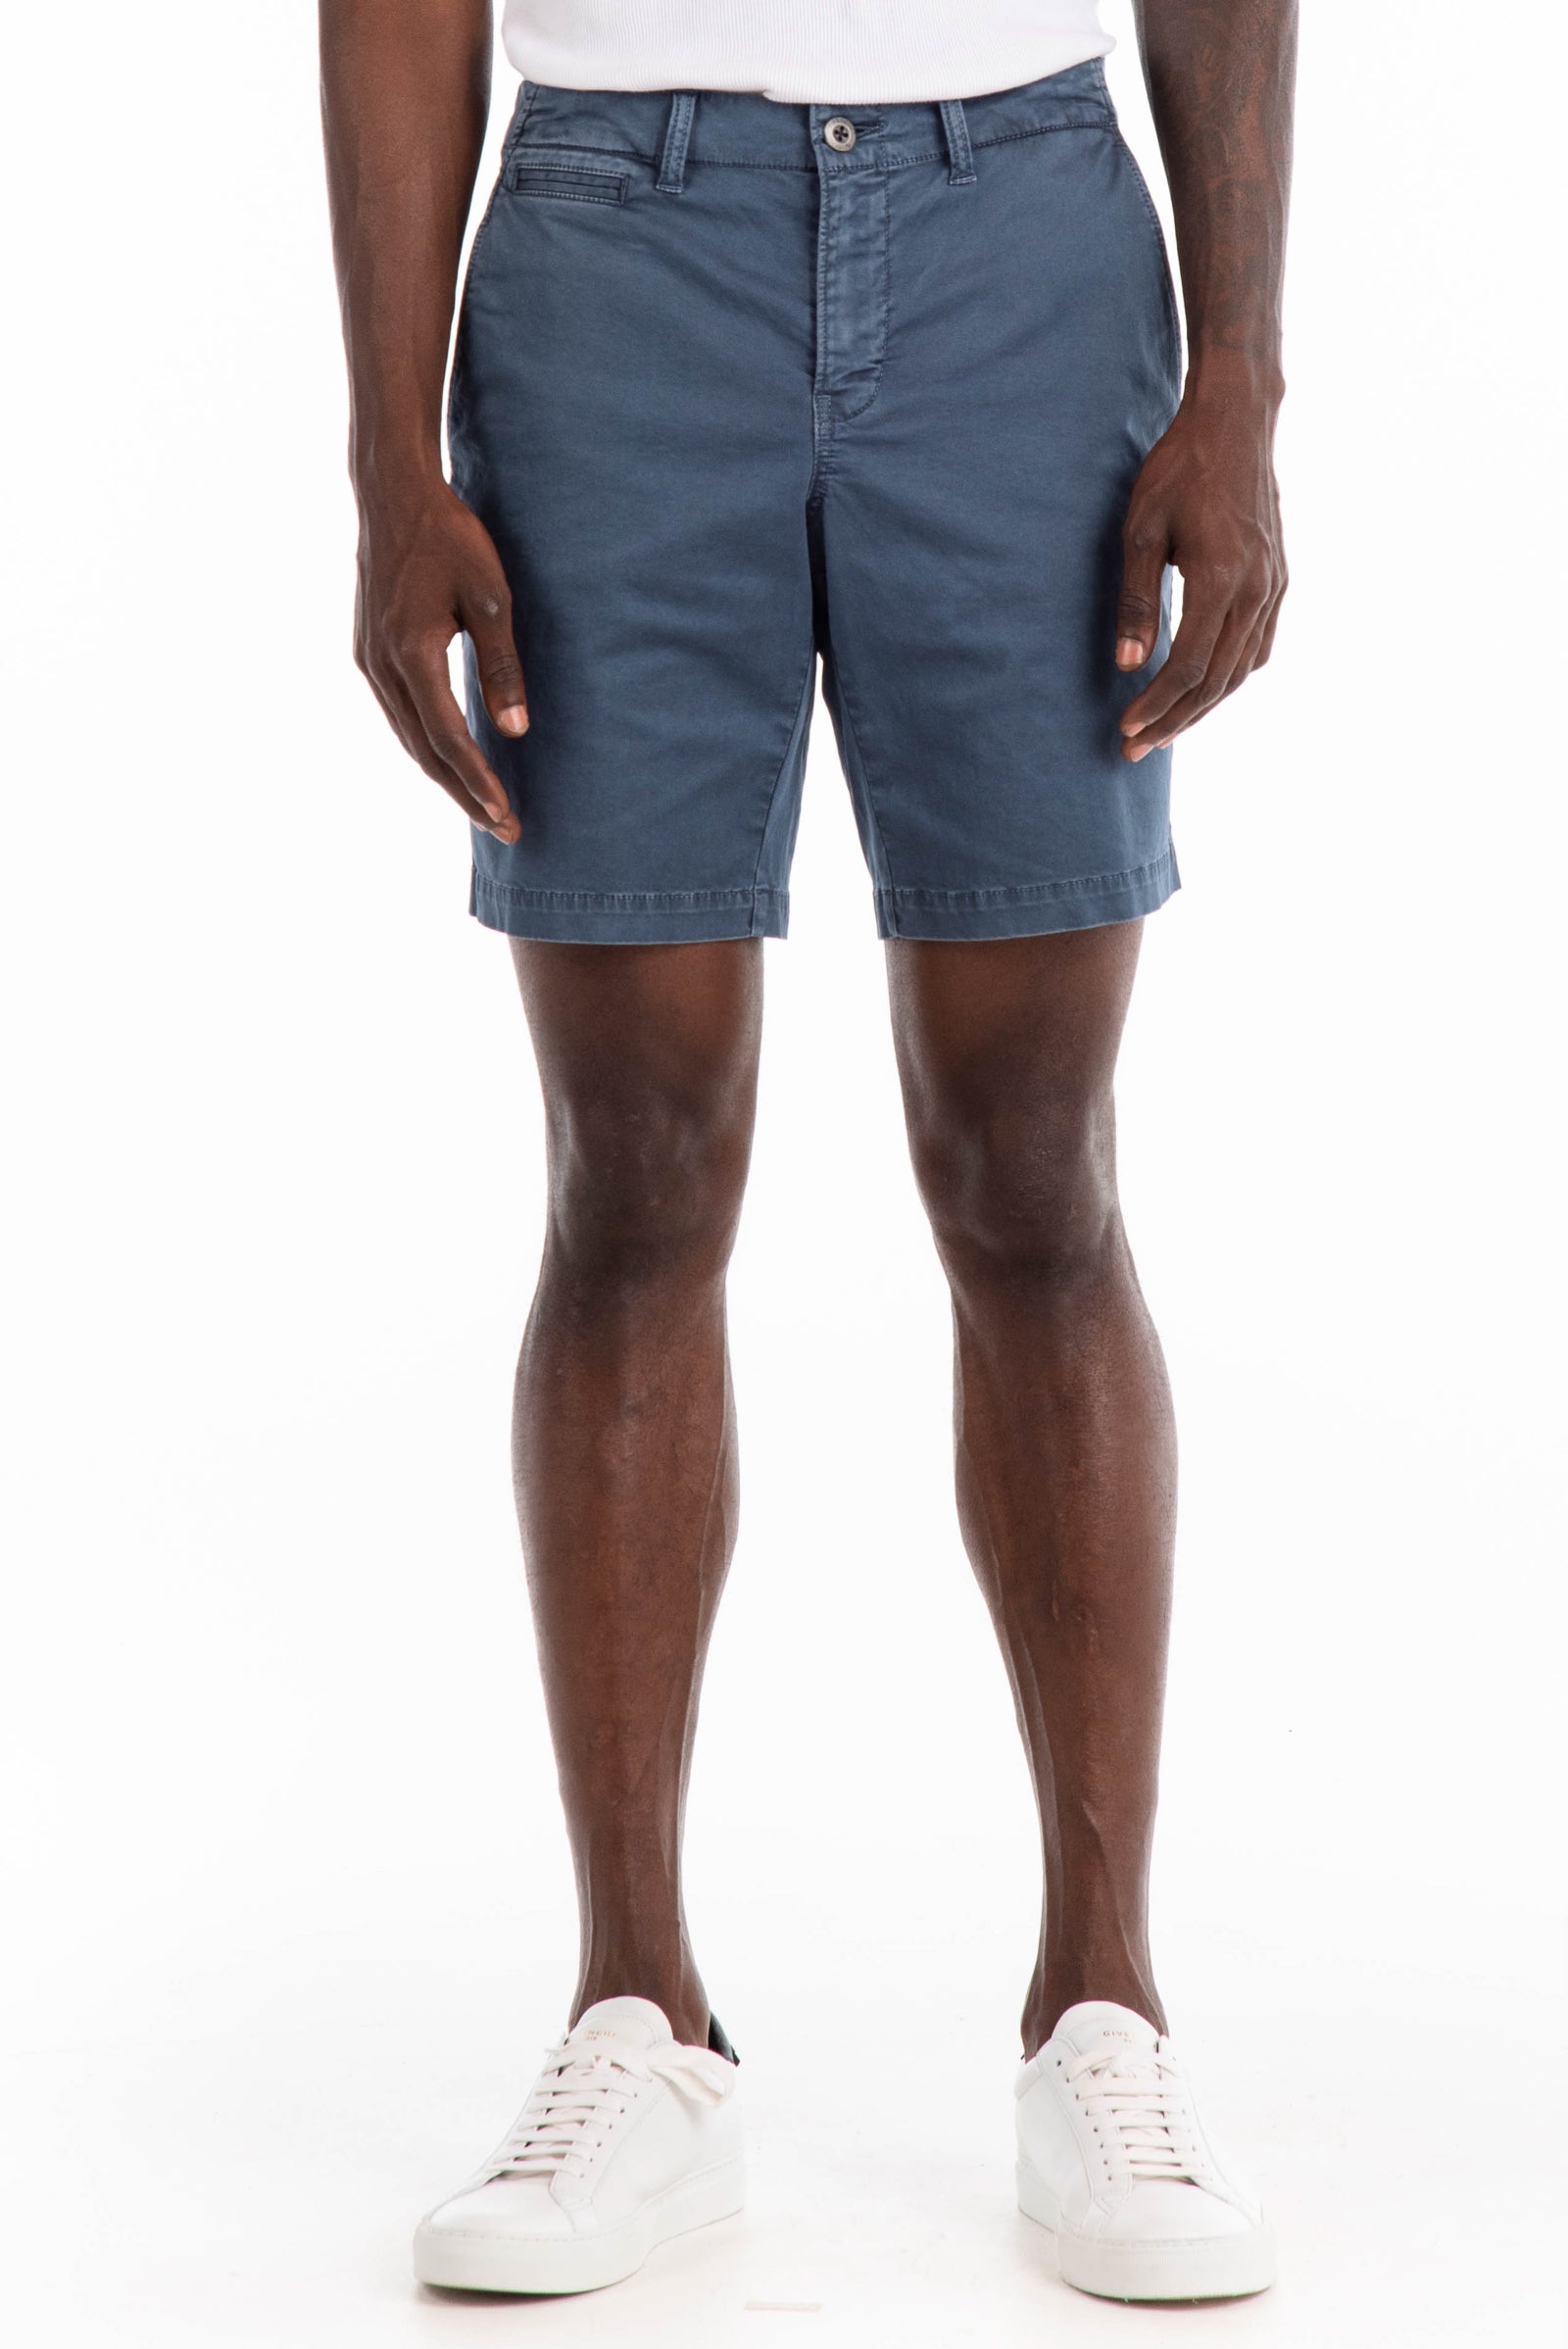 Original Paperbacks Walden Chino Short in Slate on Model Cropped Front View